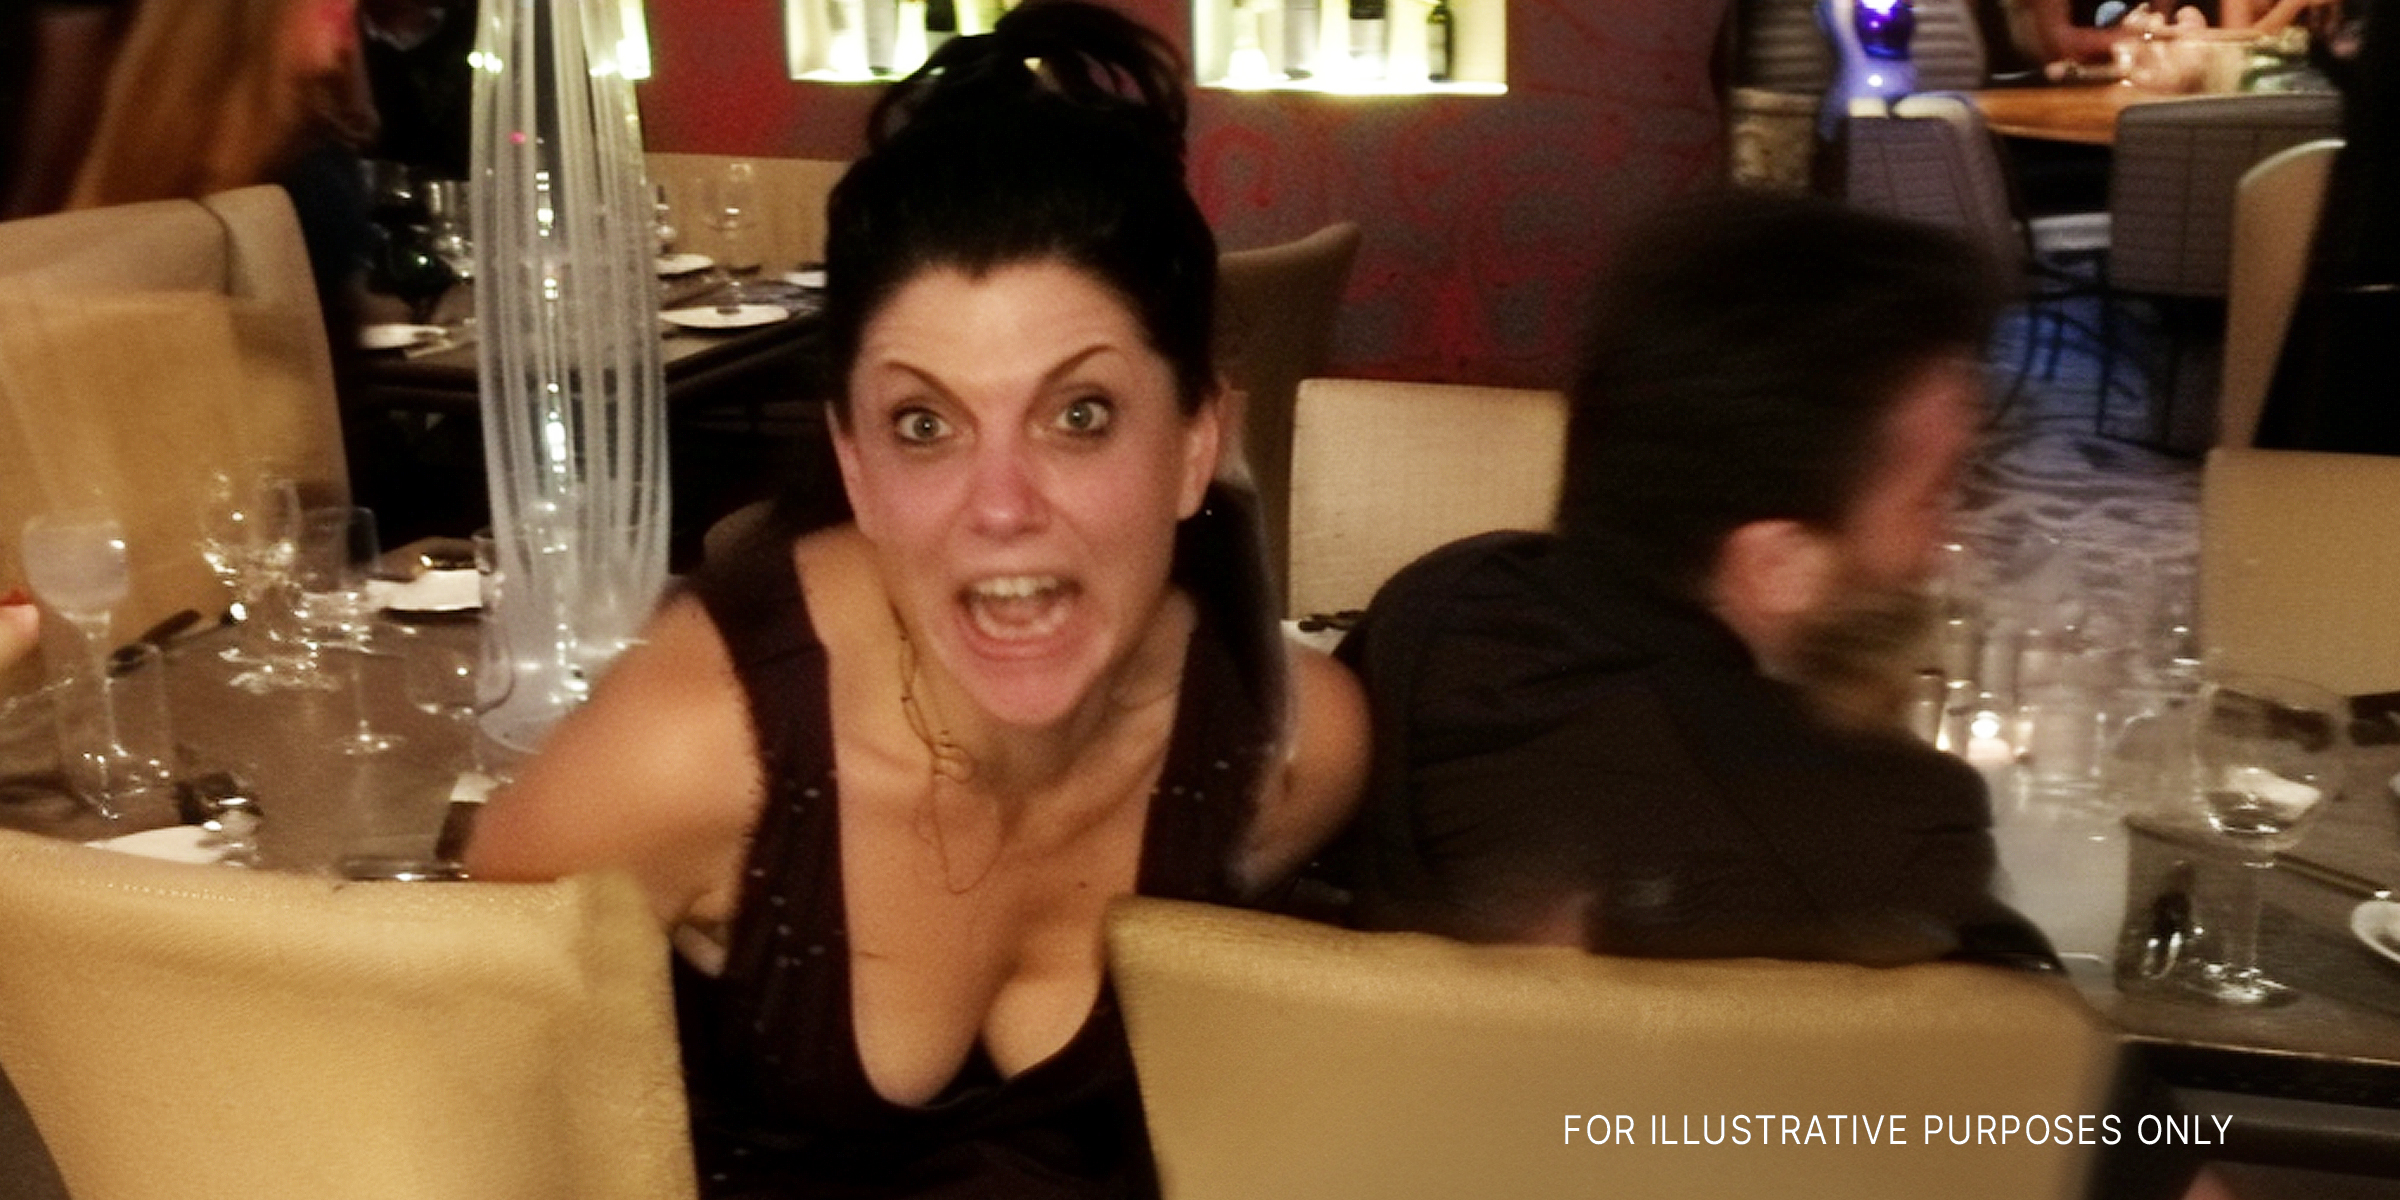 An angry woman at a restaurant | Source: Midjourney